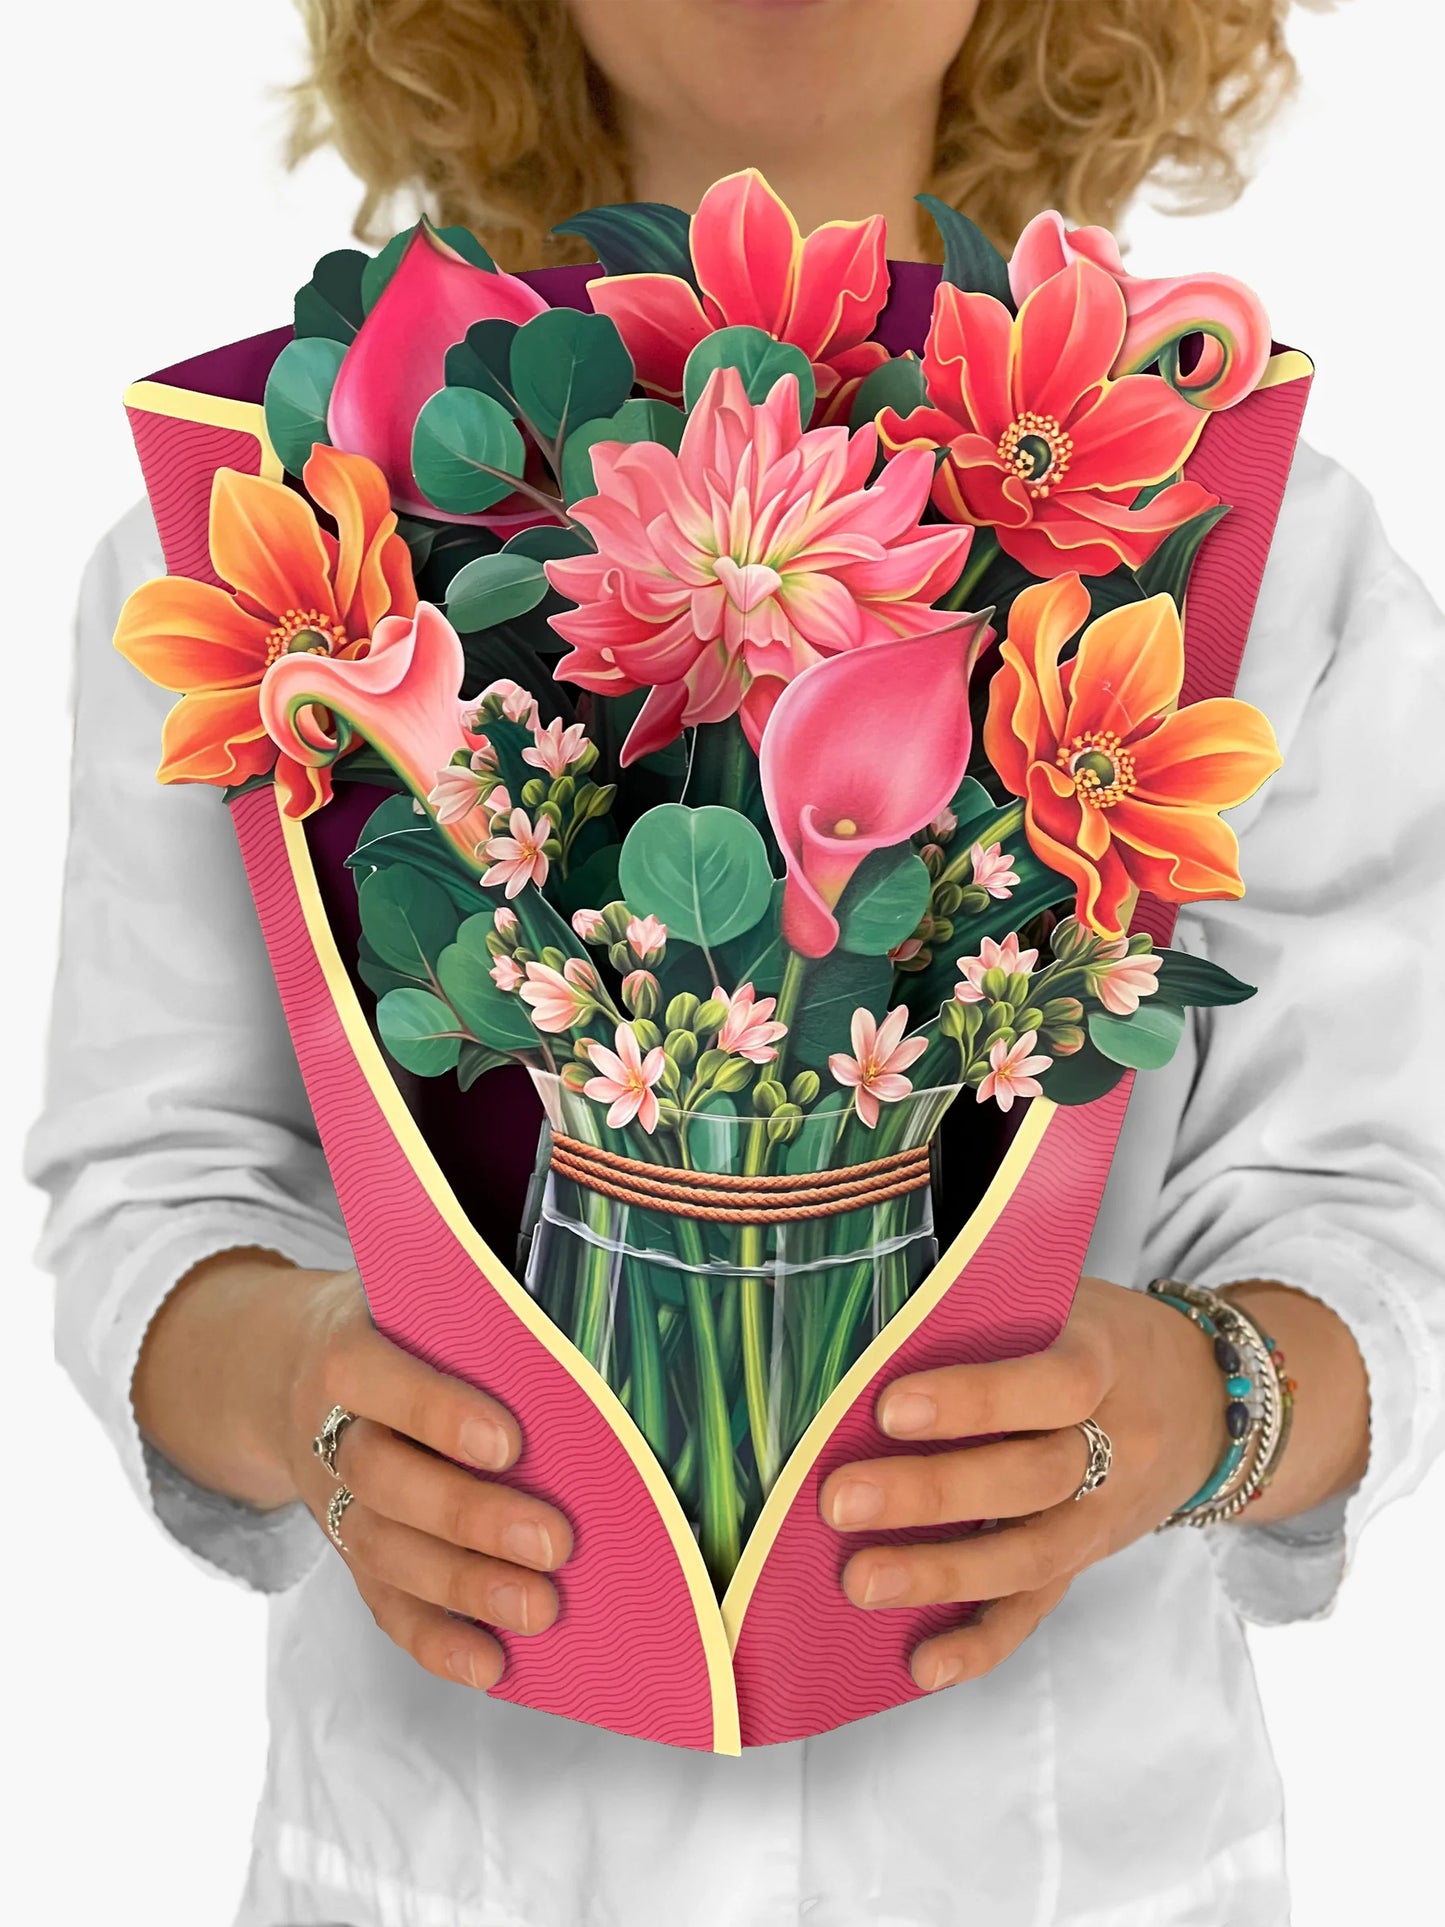 person holding dear dahlia paper bouquet in front of them.